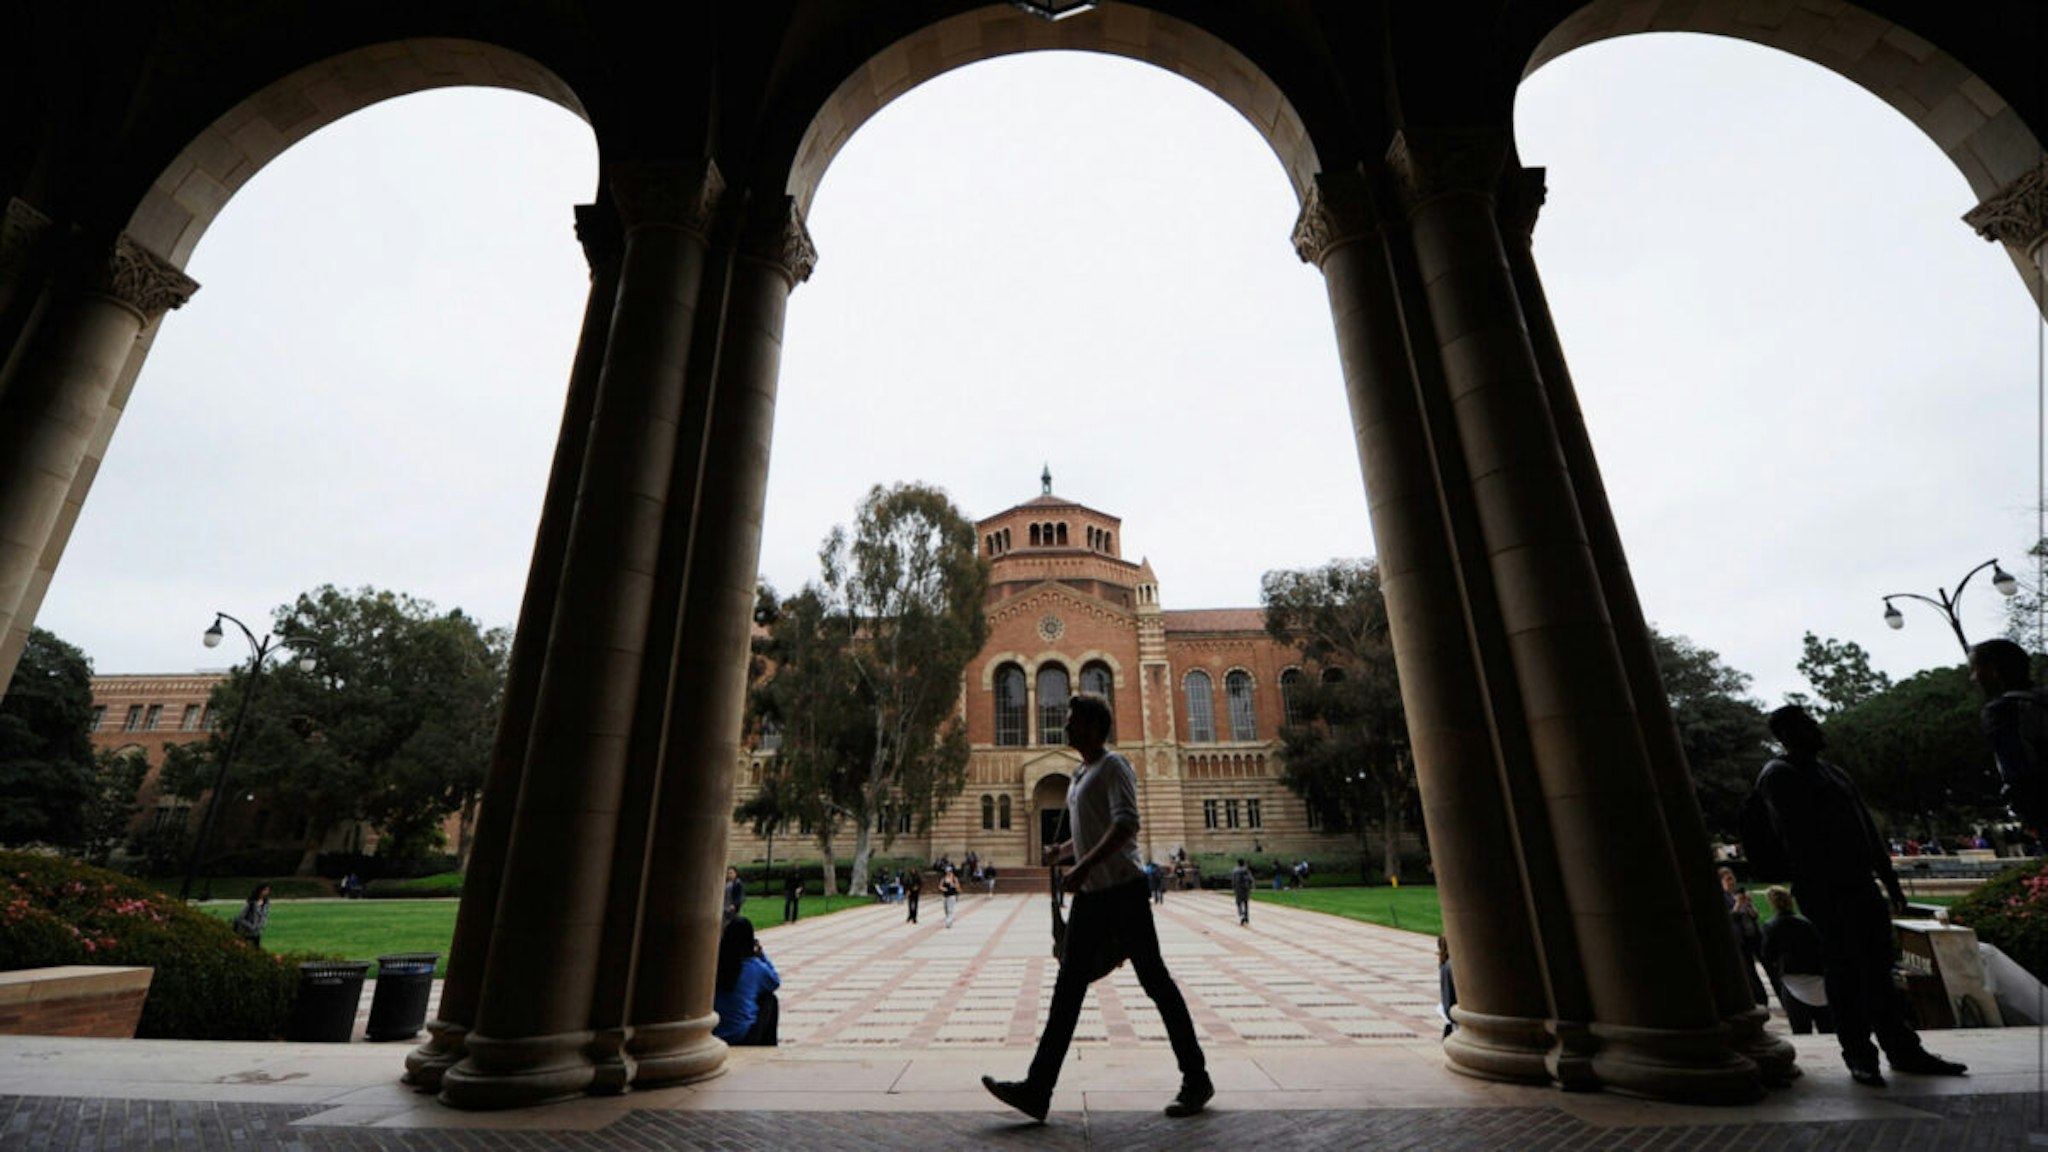 A student walks near Royce Hall on the campus of UCLA on April 23, 2012 in Los Angeles, California.